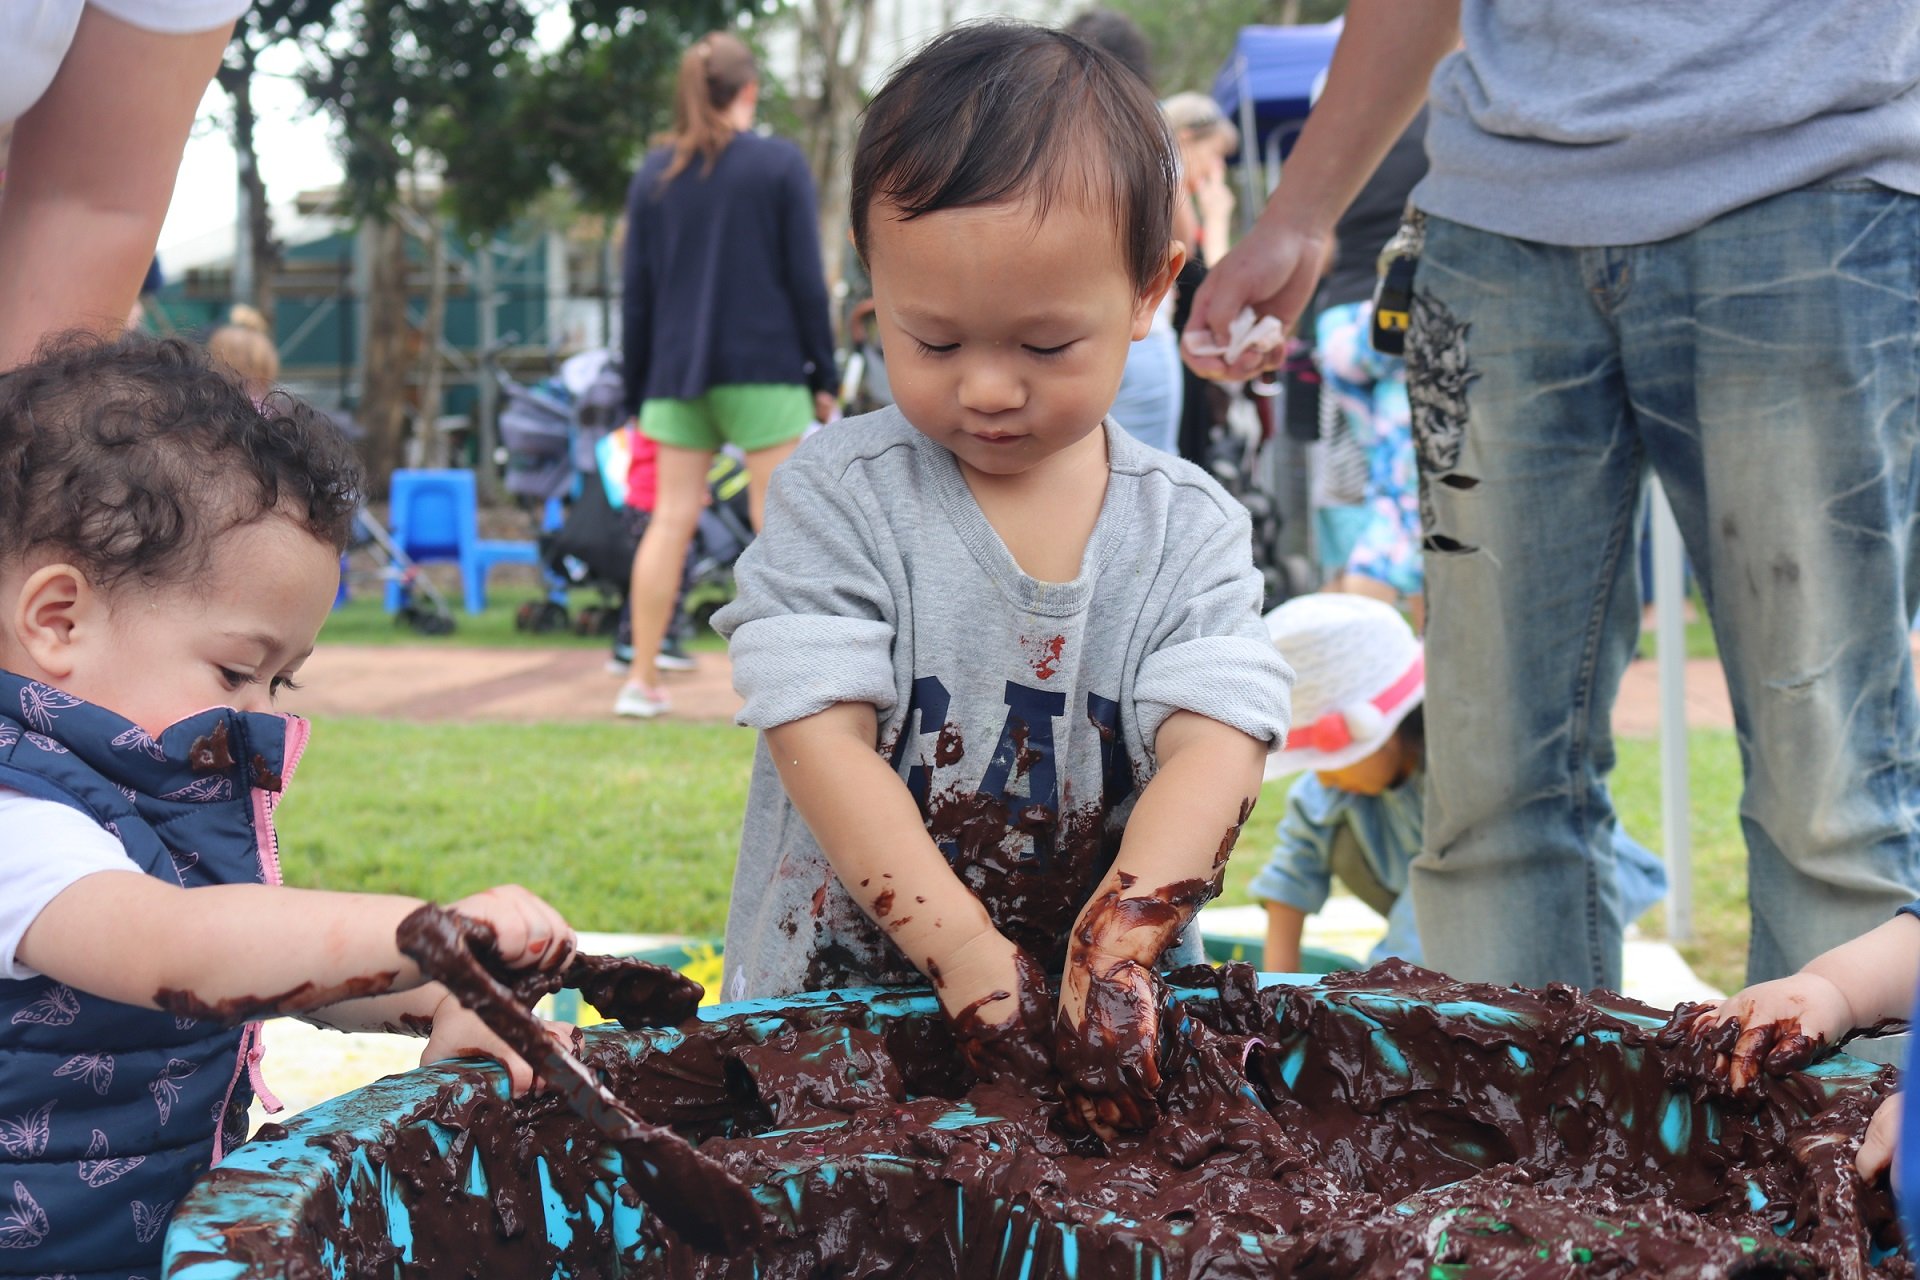 Taste-safe mud at a Messy Play May event